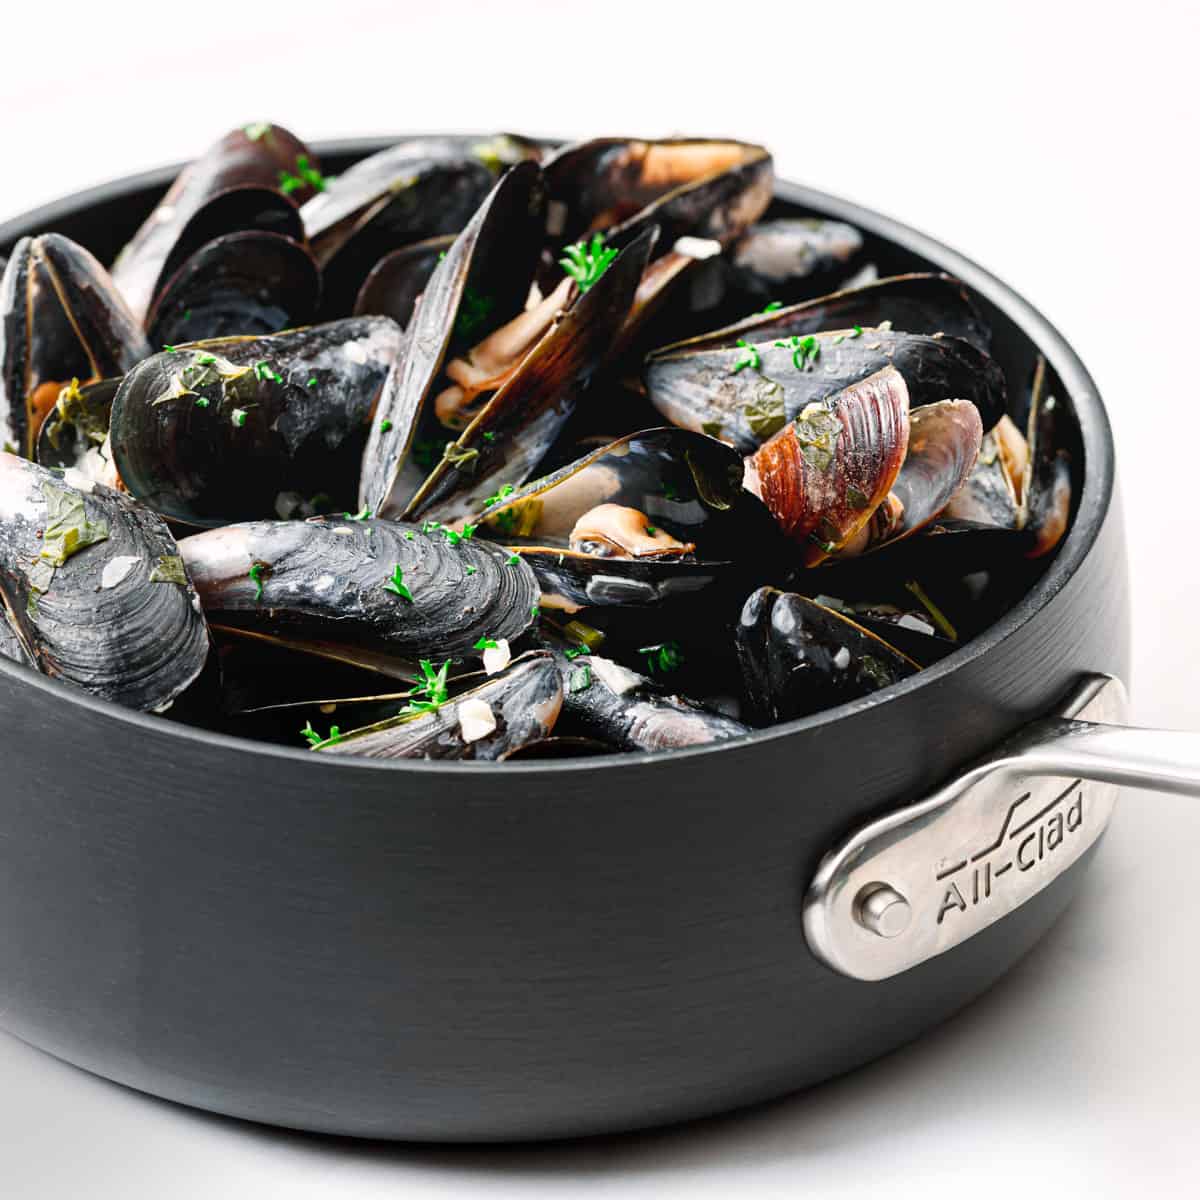 How to Cook Mussels ala Moules Marinieres